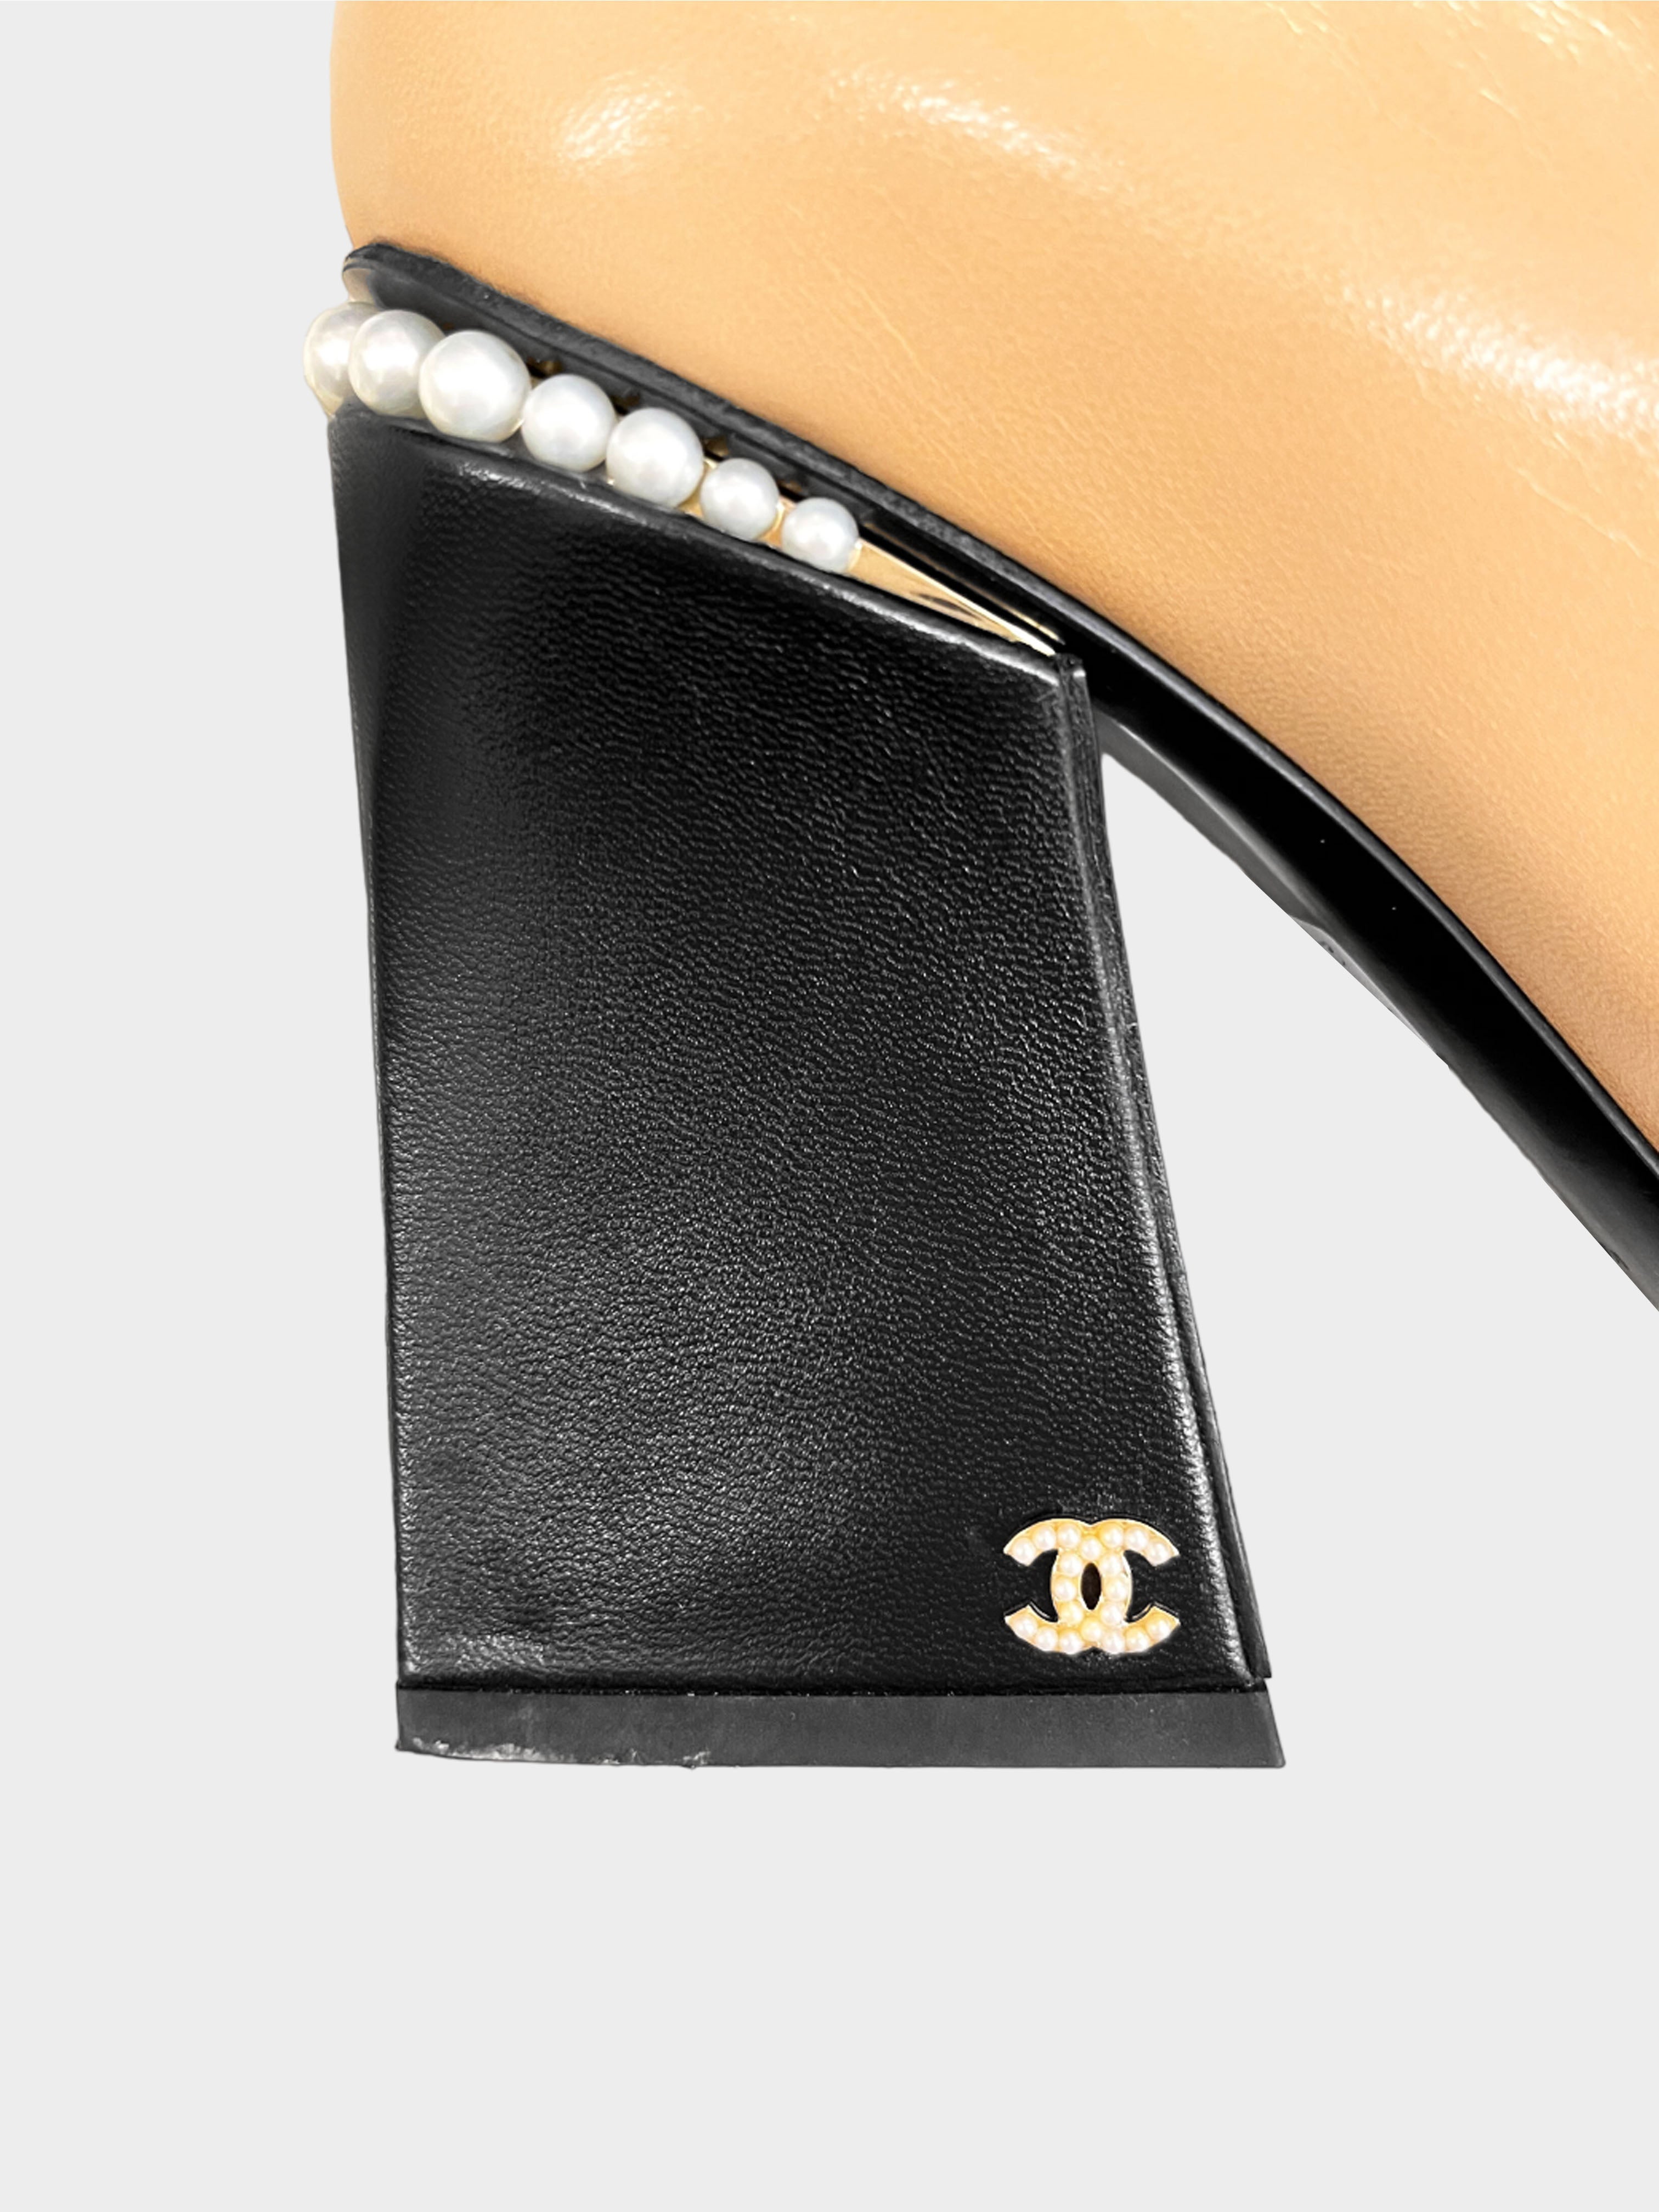 Chanel 2022 Two-toned Goatskin Leather Pumps with Pearls